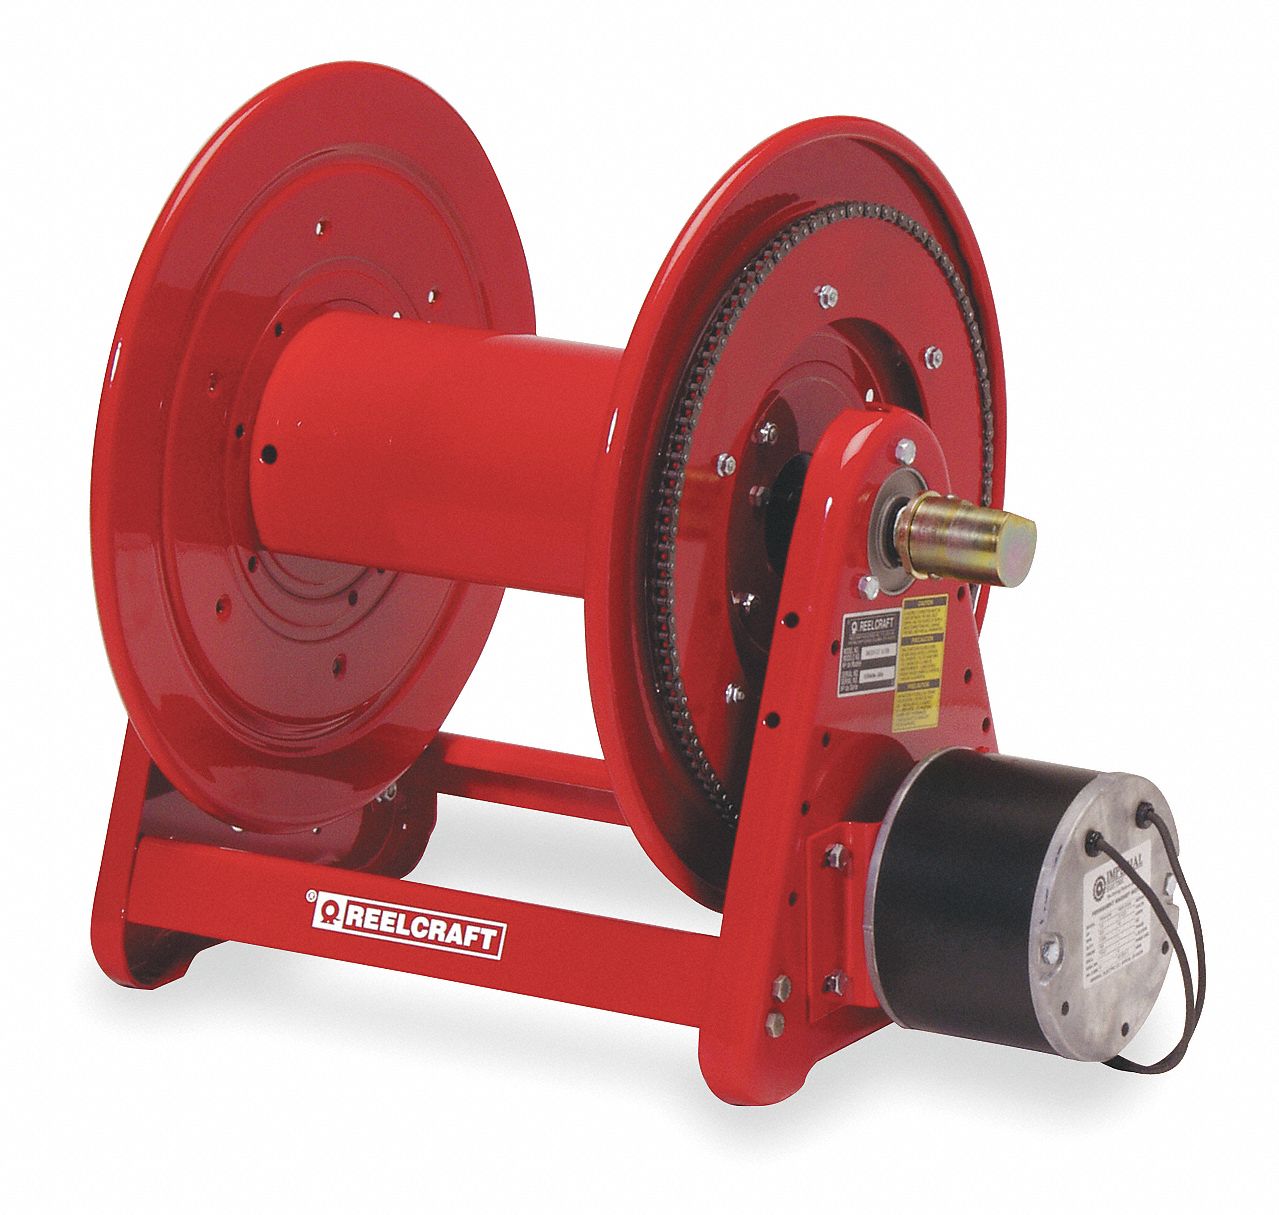 REELCRAFT 200 ft. Heavy Duty, Motor Driven Hose Reel, Red   Motor Driven and Hand Crank Hose Reels   5Z340|EA32112 M12D1